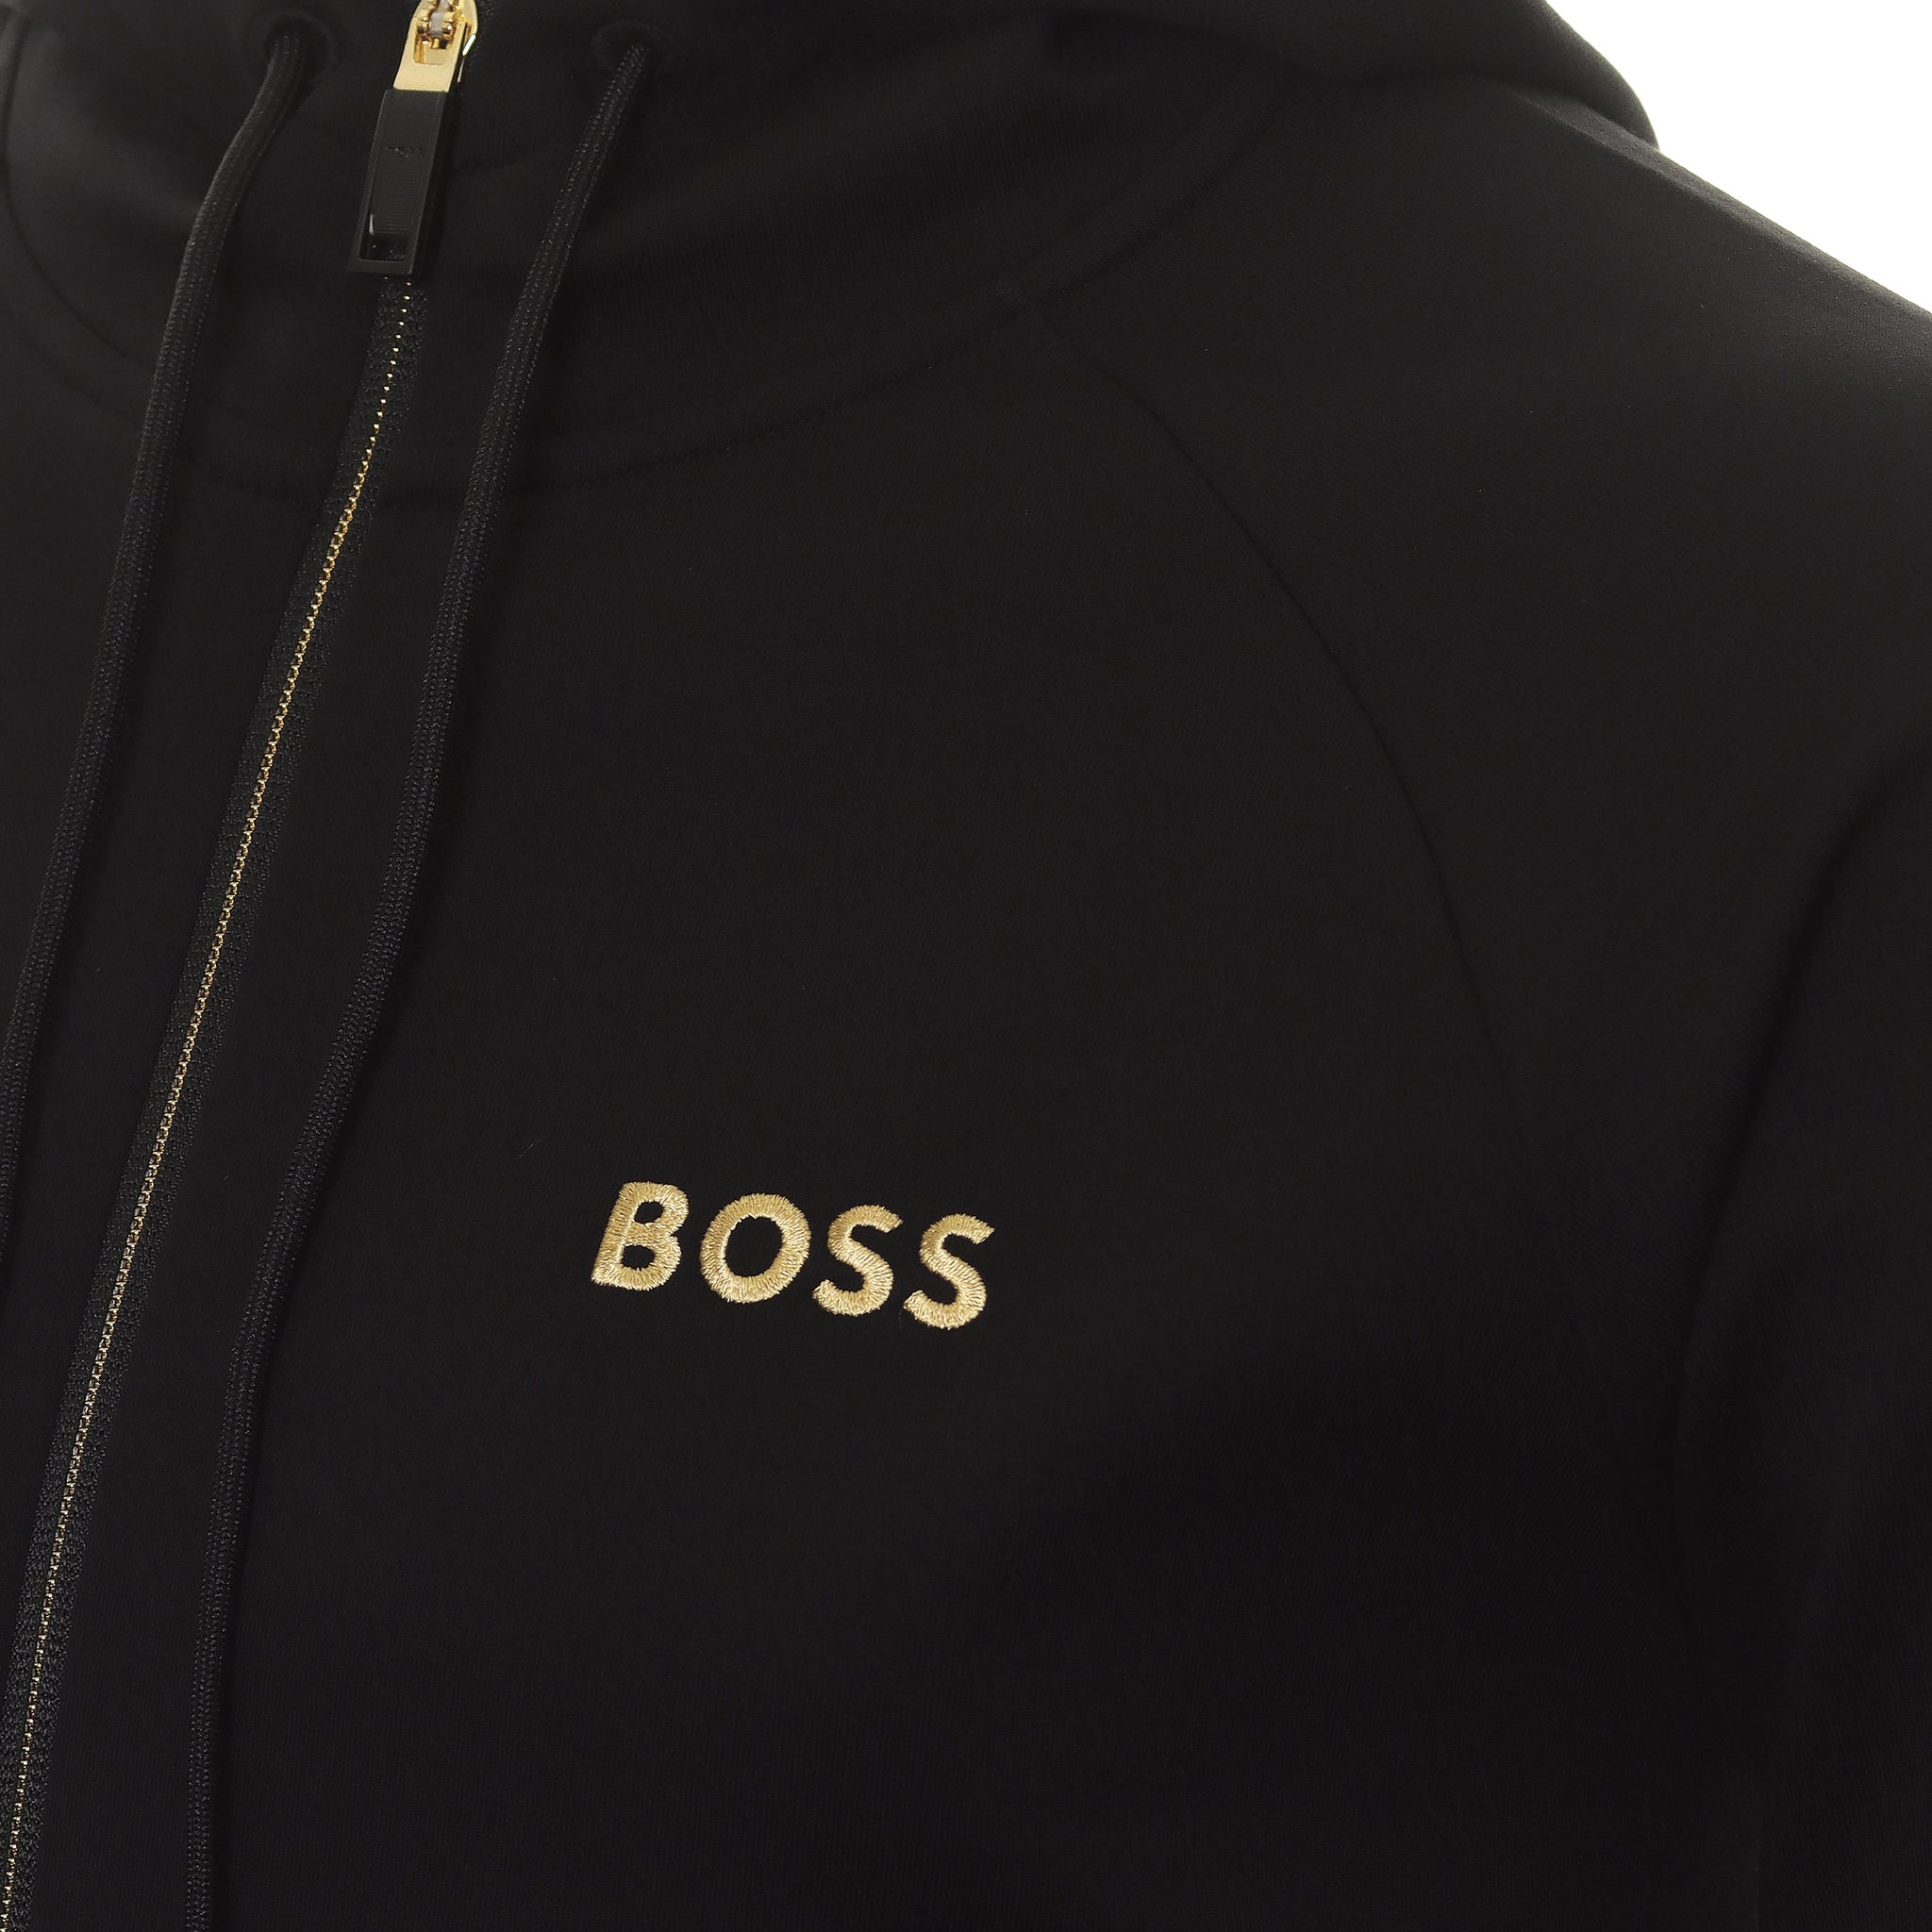 BOSS Saggy 1 Hooded Jacket PS23 50482888 Black 001 | Function18 ...